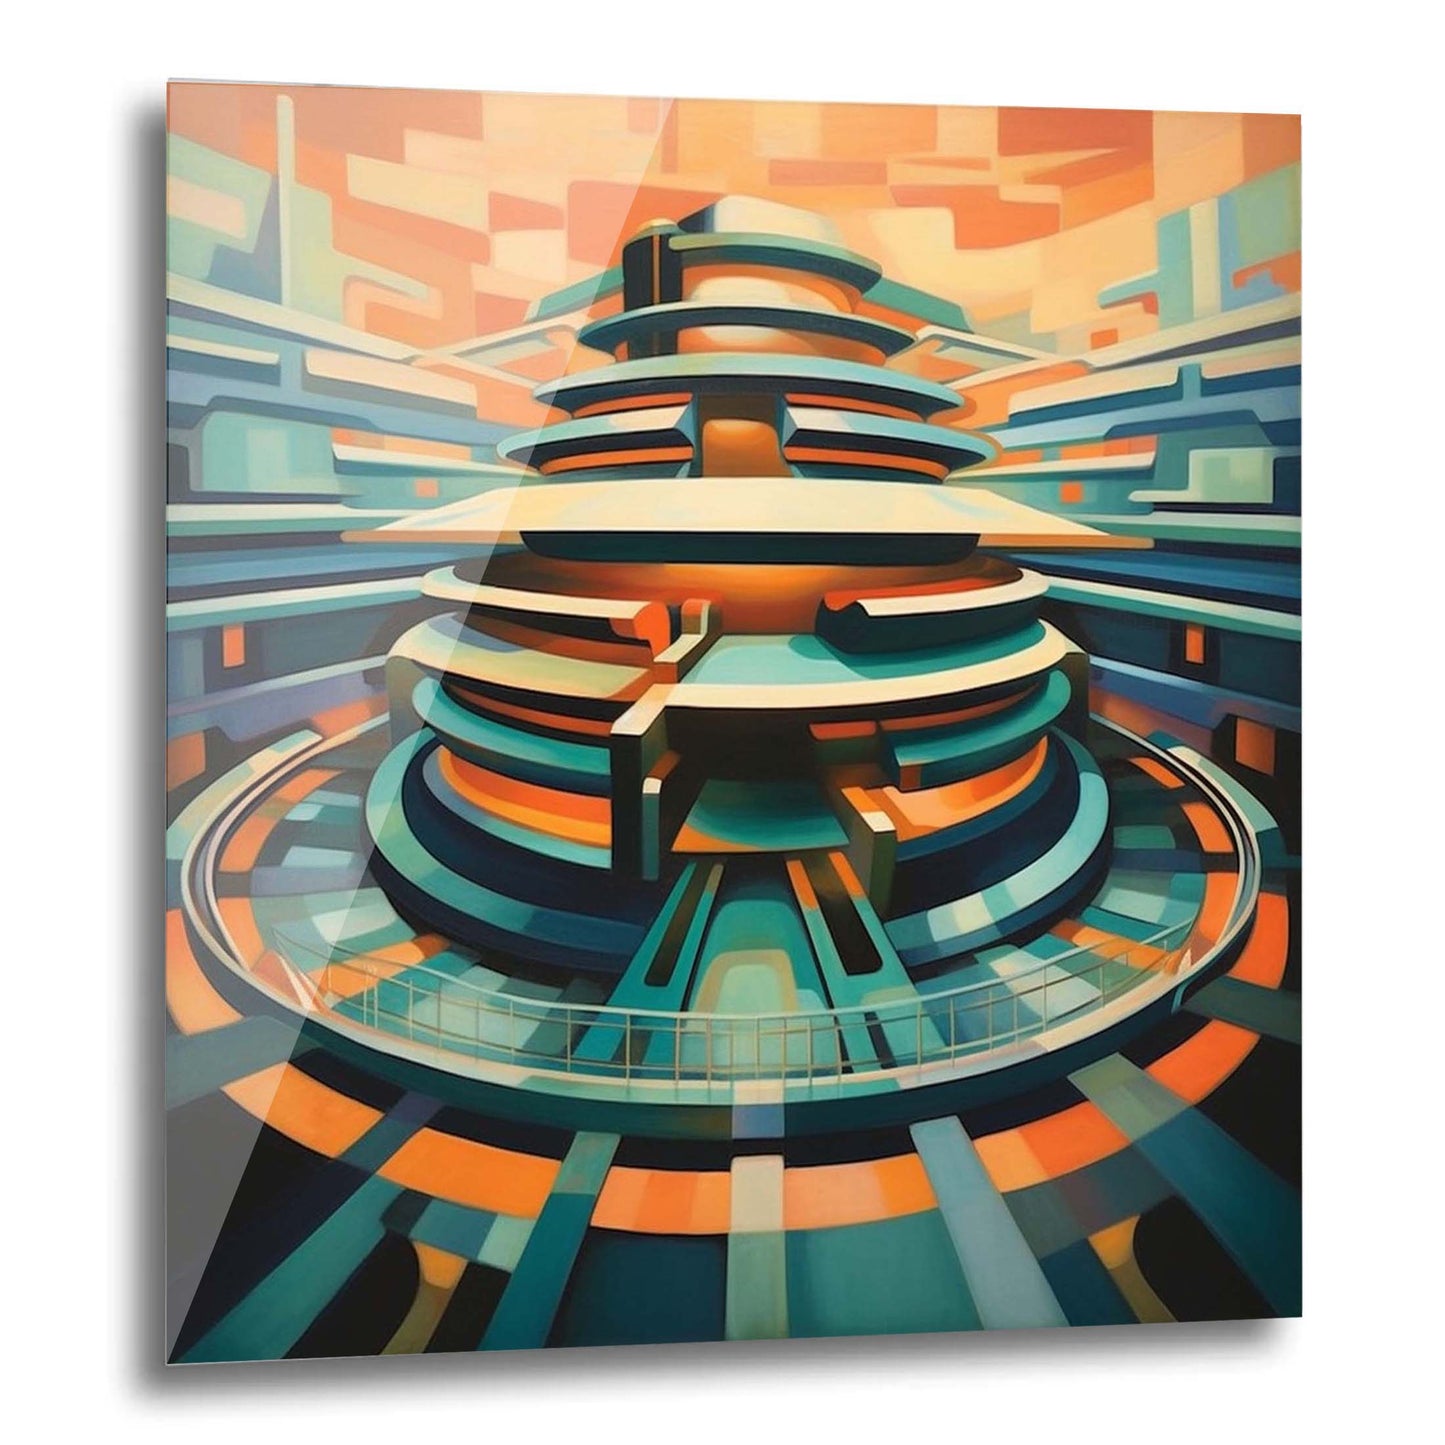 New York Guggenheim Museum - mural in the style of futurism